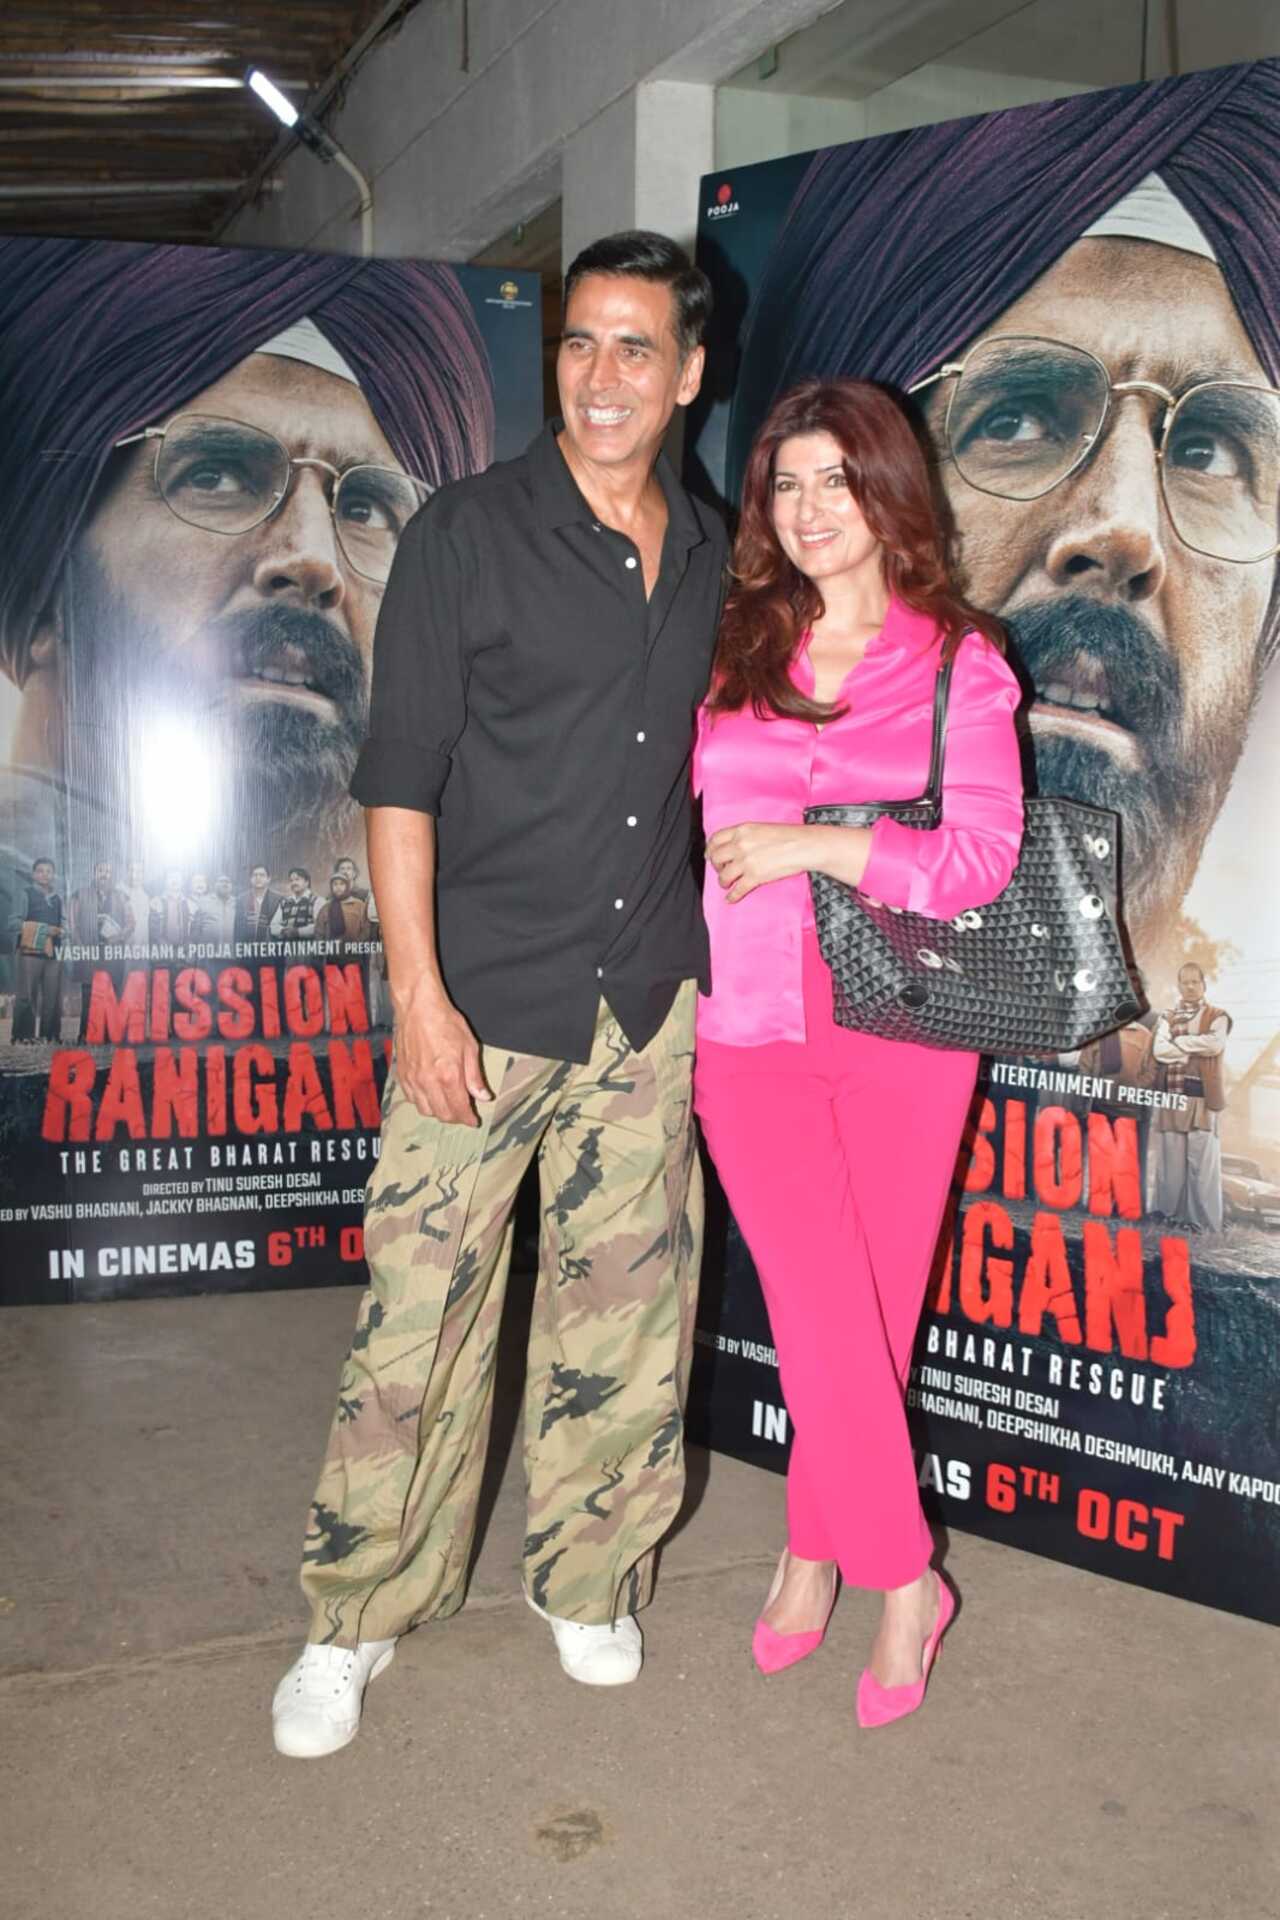 Twinkle Khanna attended the screening to cheer for her husband, Akshay Kumar